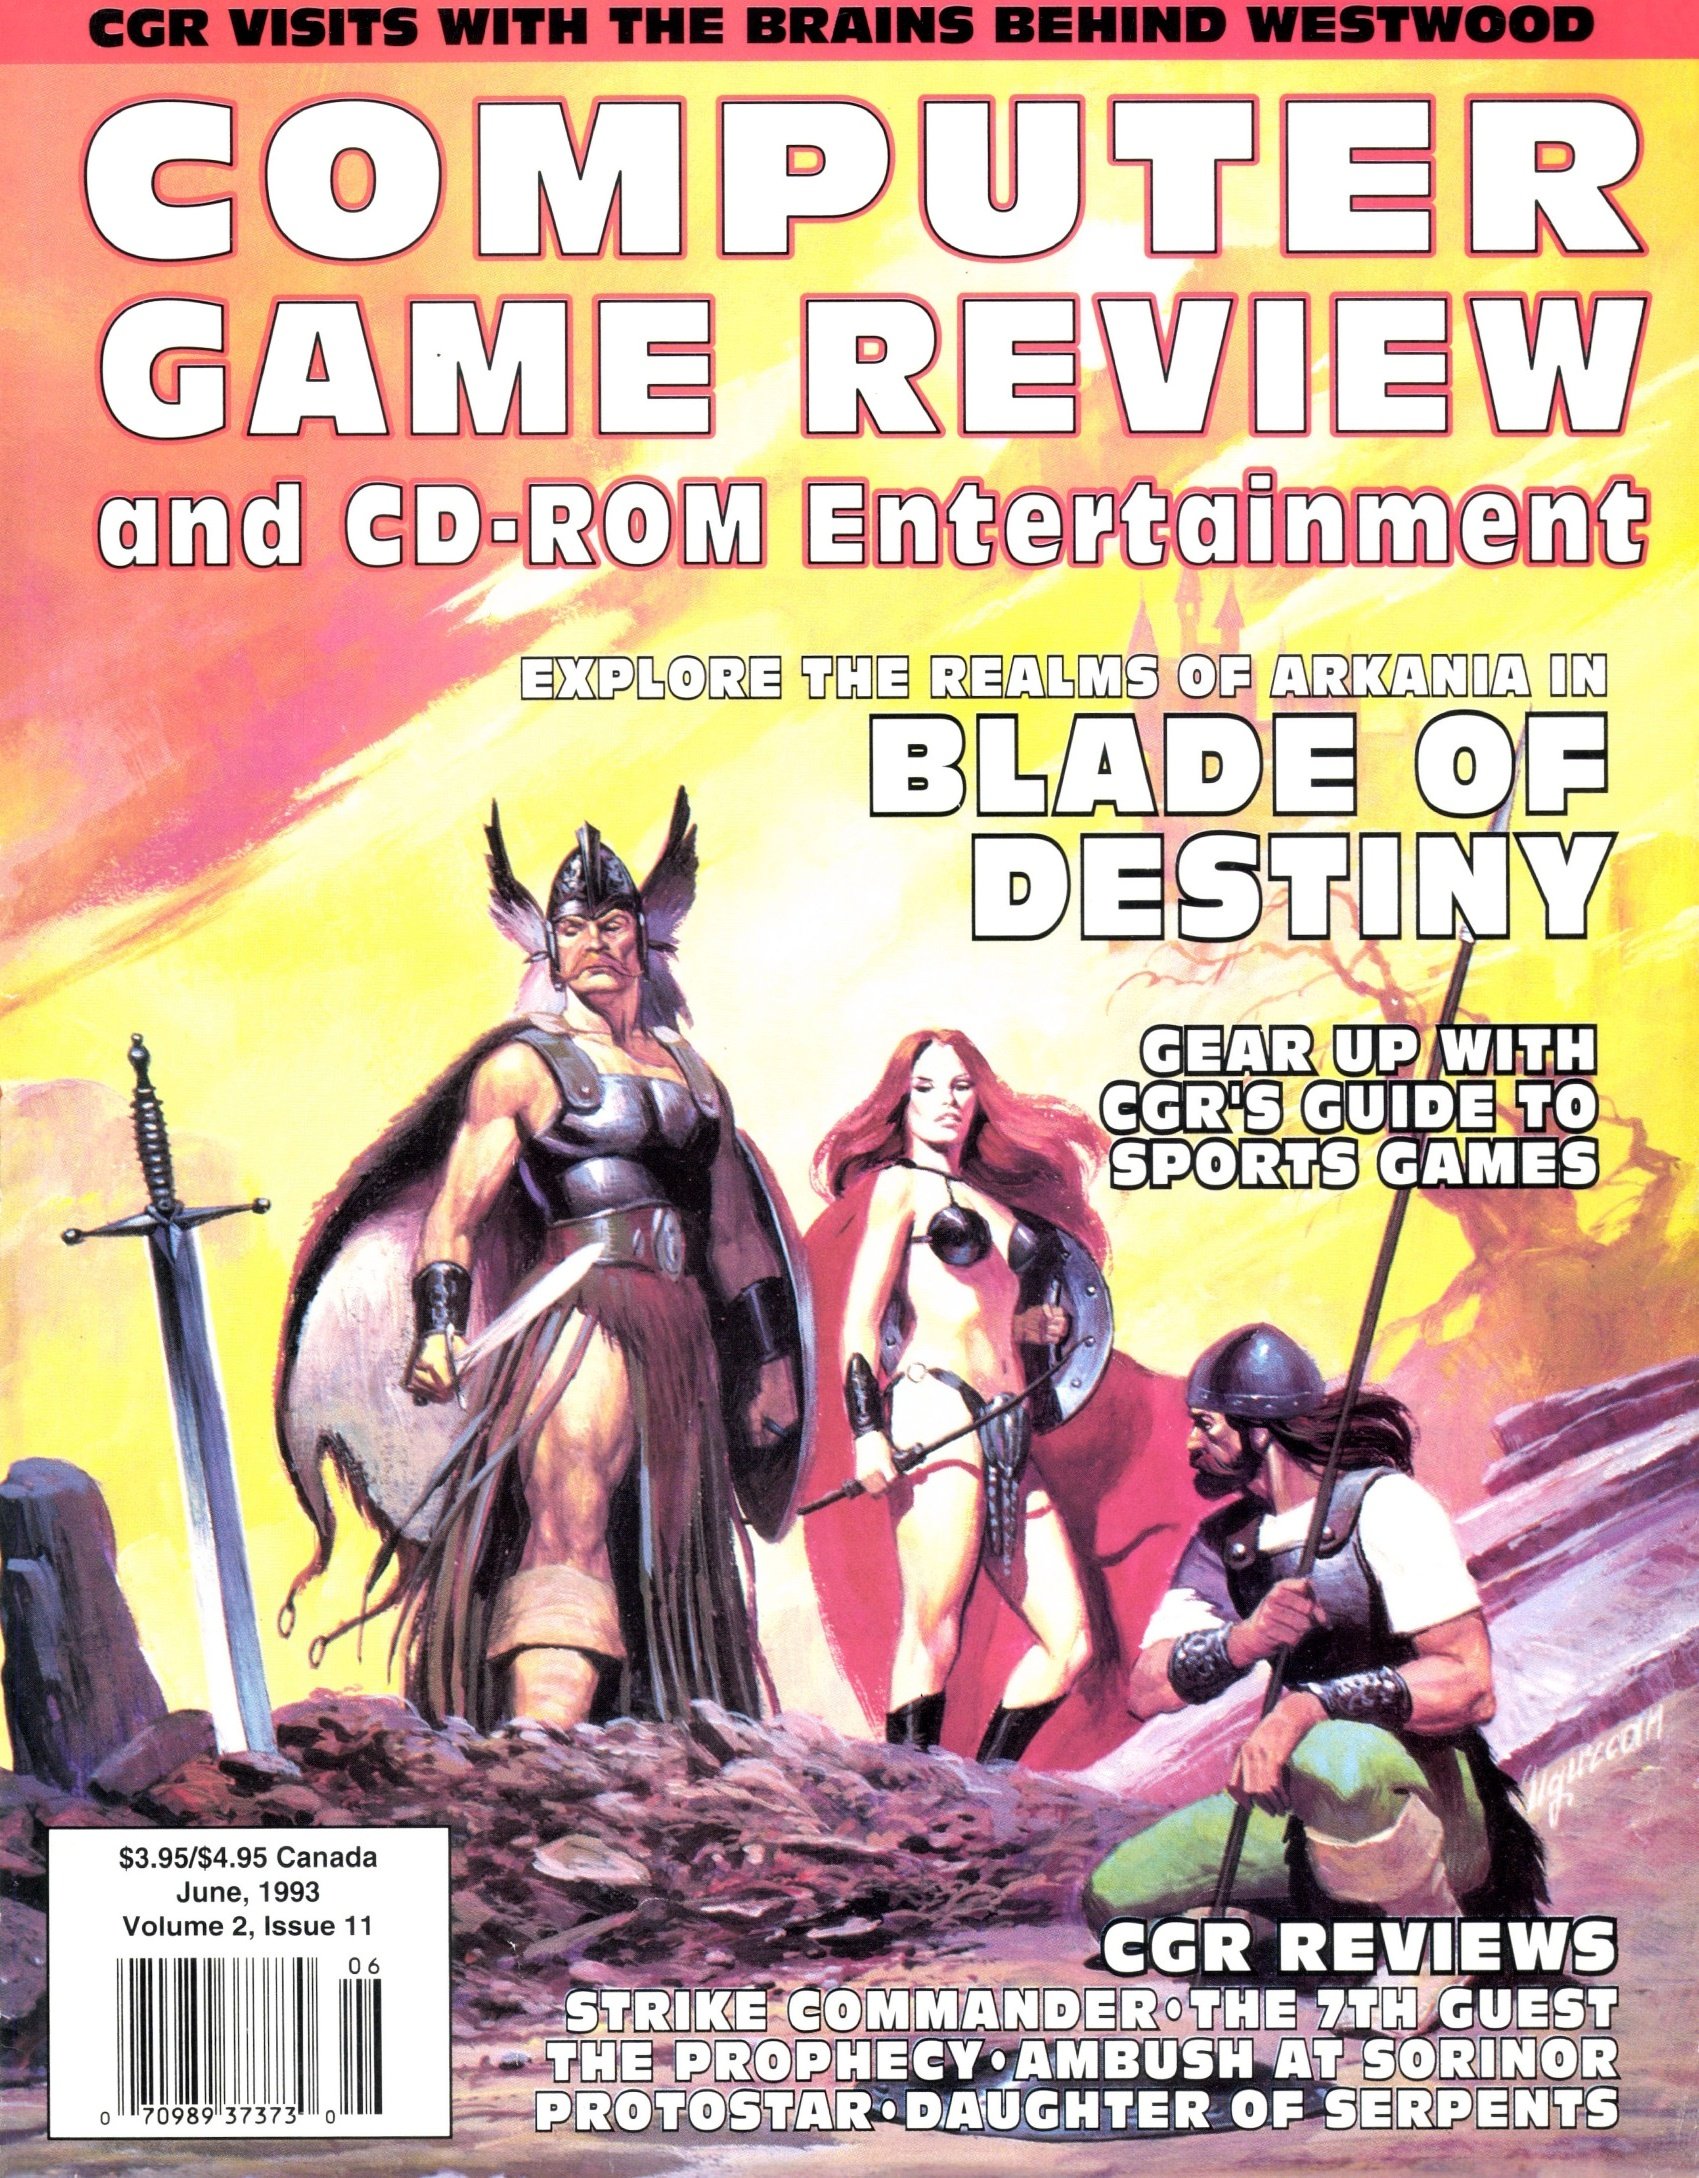 Computer Game Review Issue 23 (June 1993)